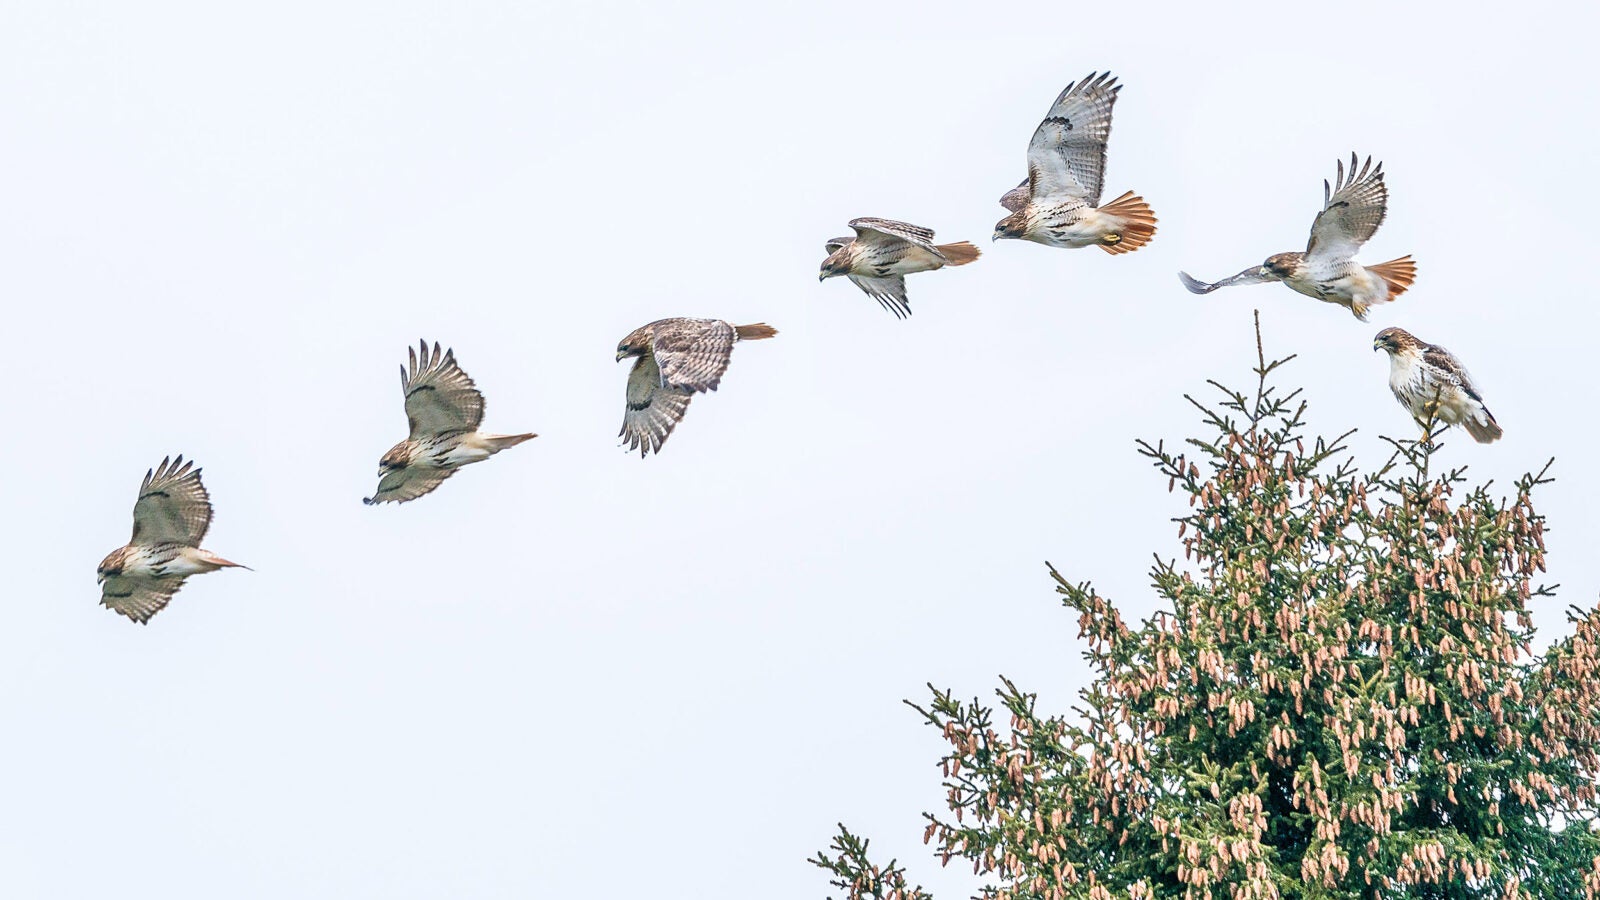 A hawk leaving a tree, seen in multiple poses.